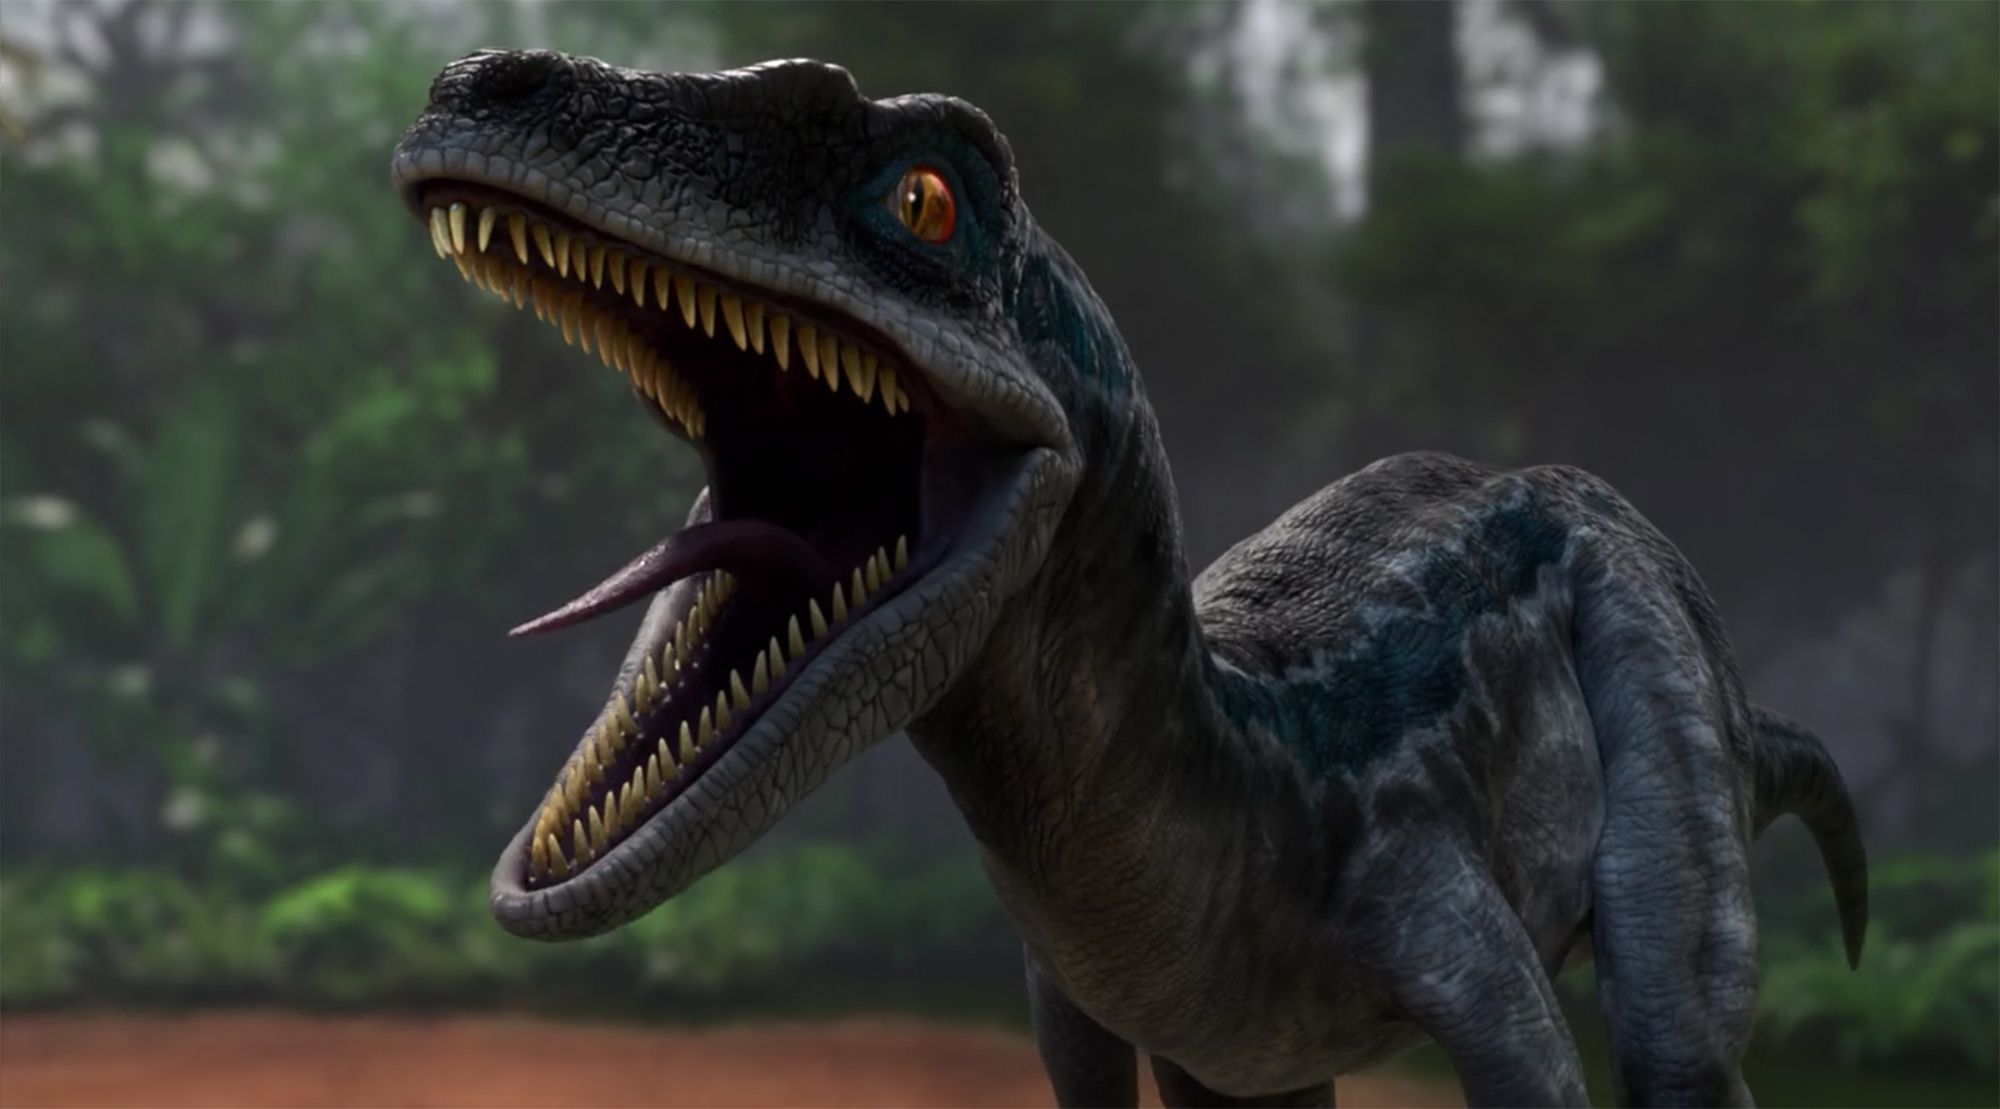 Jurassic World: Camp Cretaceous season 3 team on filling in gaps in movies